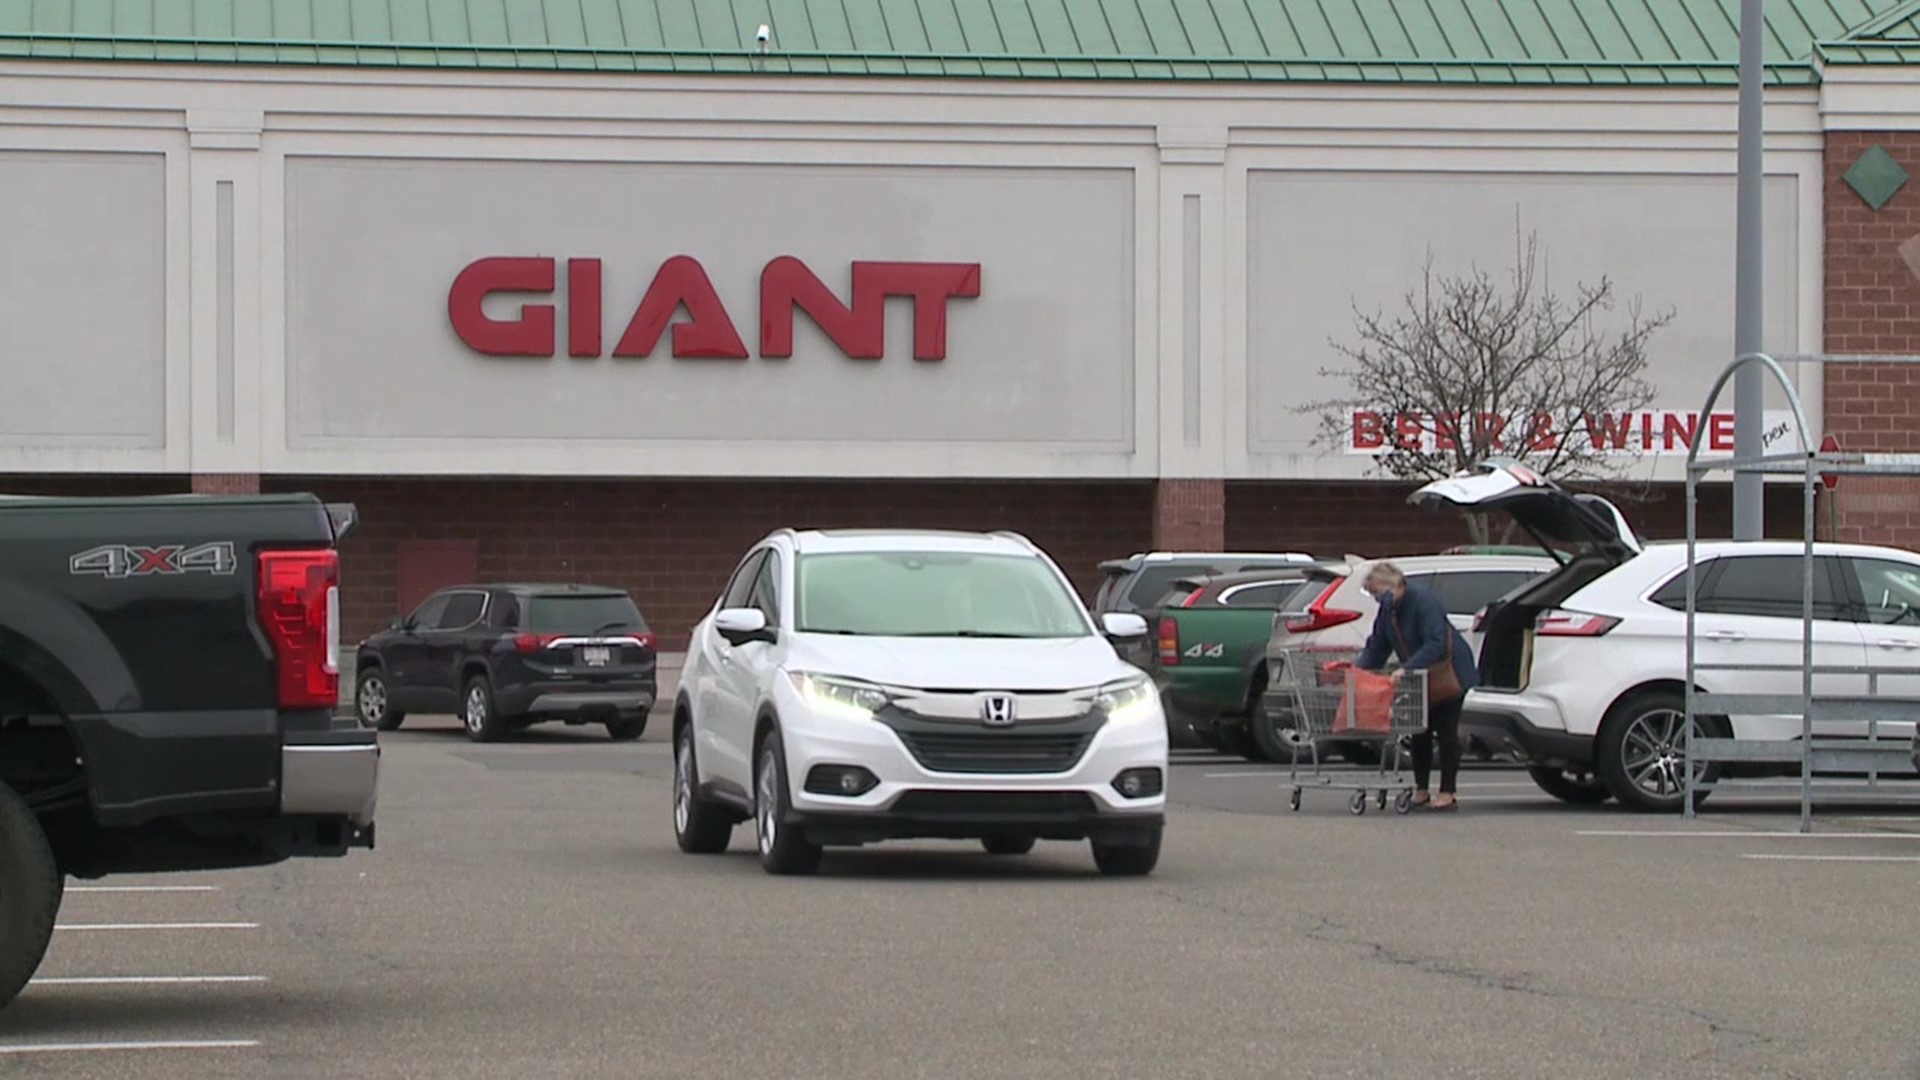 The parking lot of Giant along Route 11 was bustling with customers.